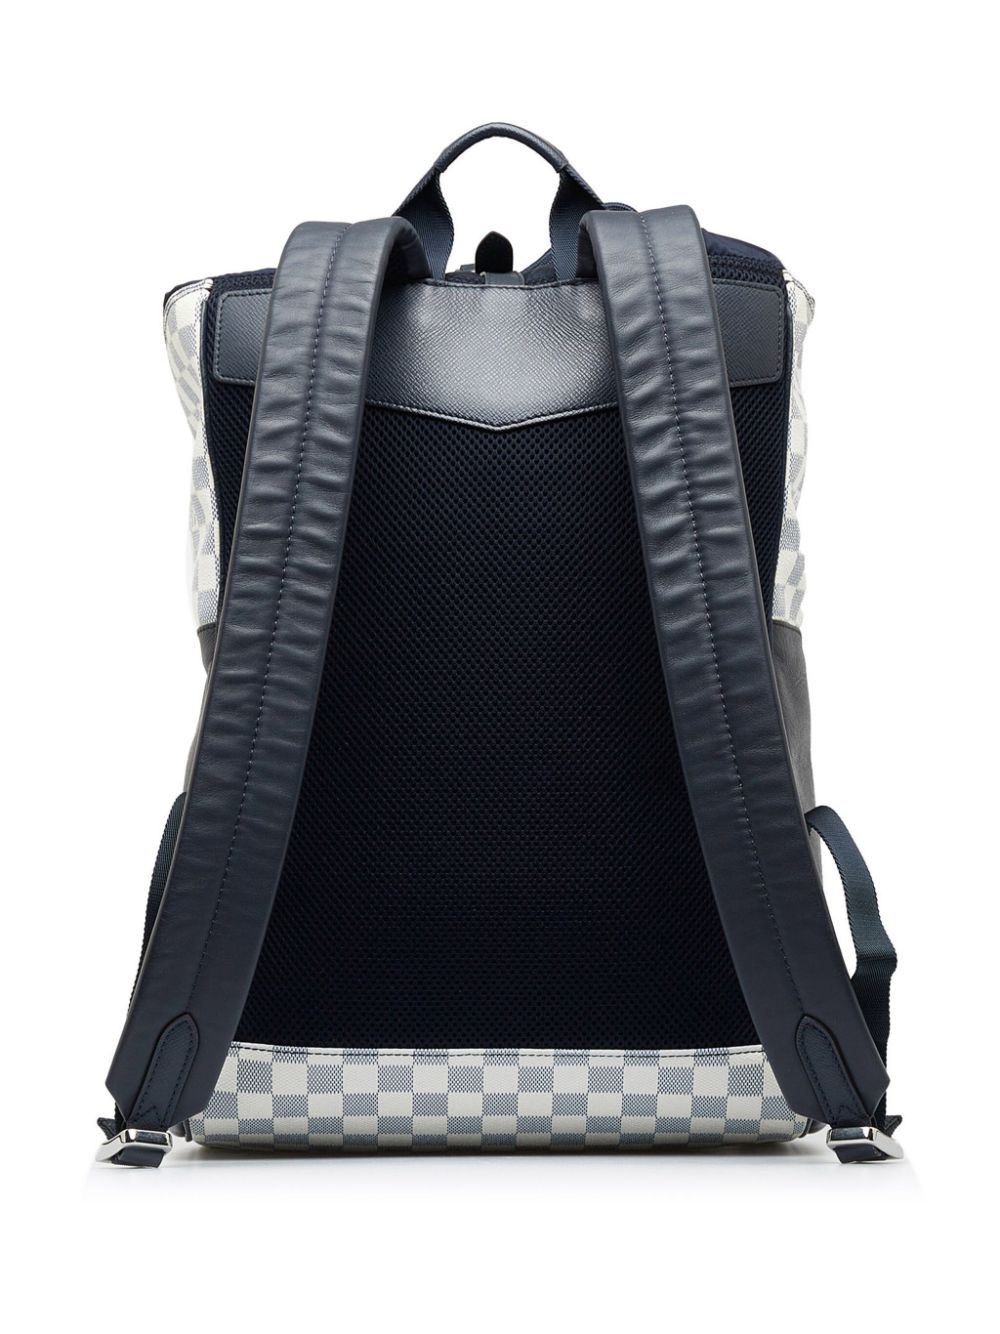 Louis Vuitton pre-owned Damier Michael Backpack - Farfetch